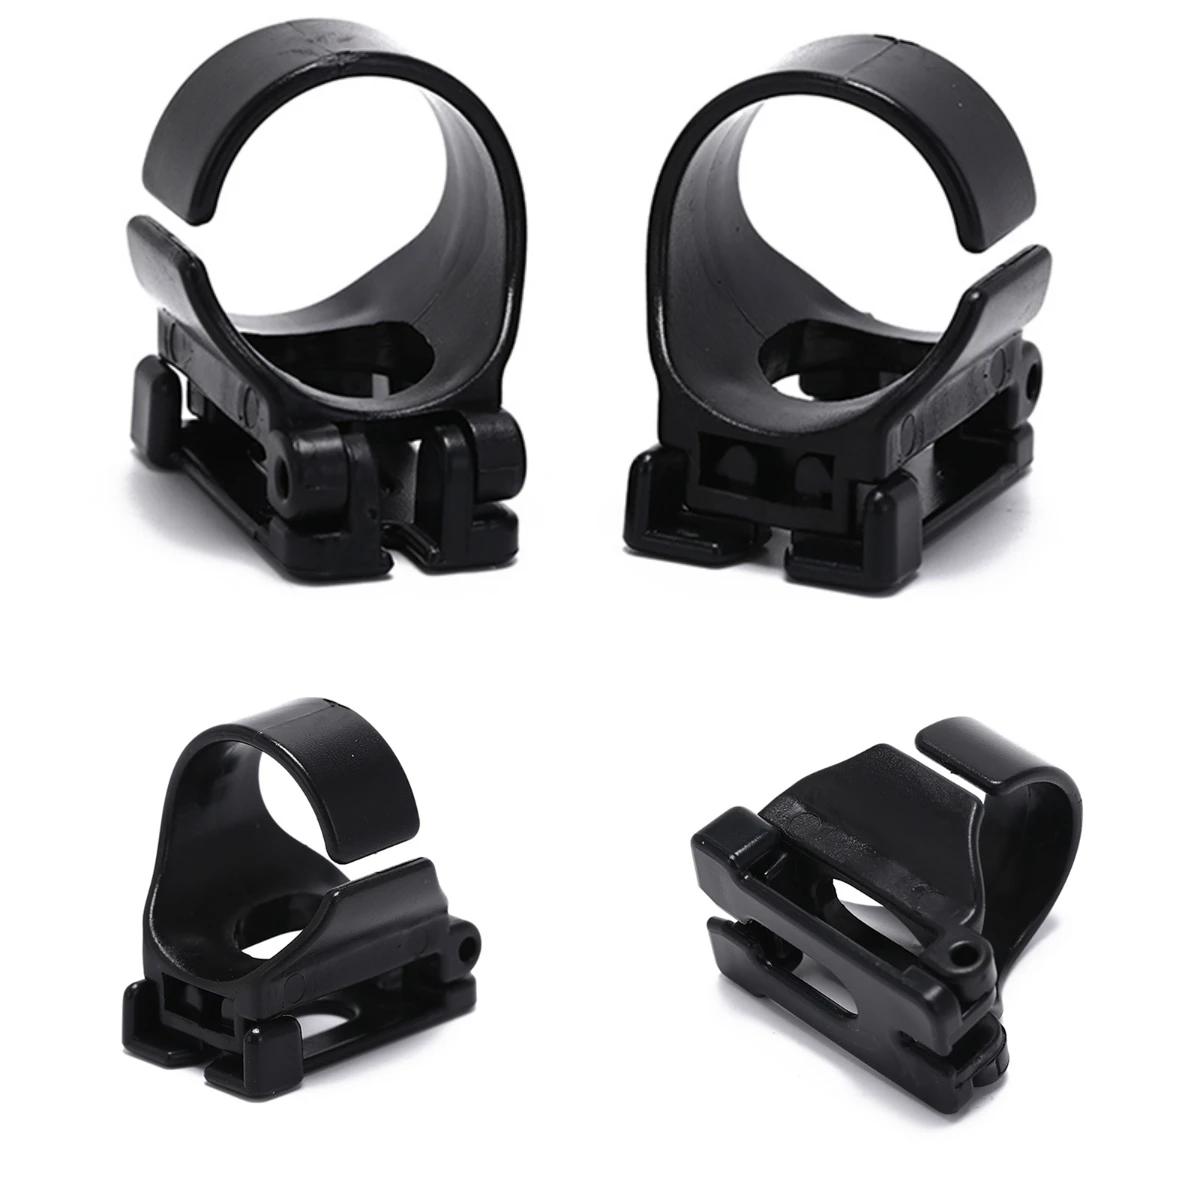 

1pair Universal Plastic Clip Snorkel Mask Keeper Holder Retainer For Scuba Diving And Snorkeling